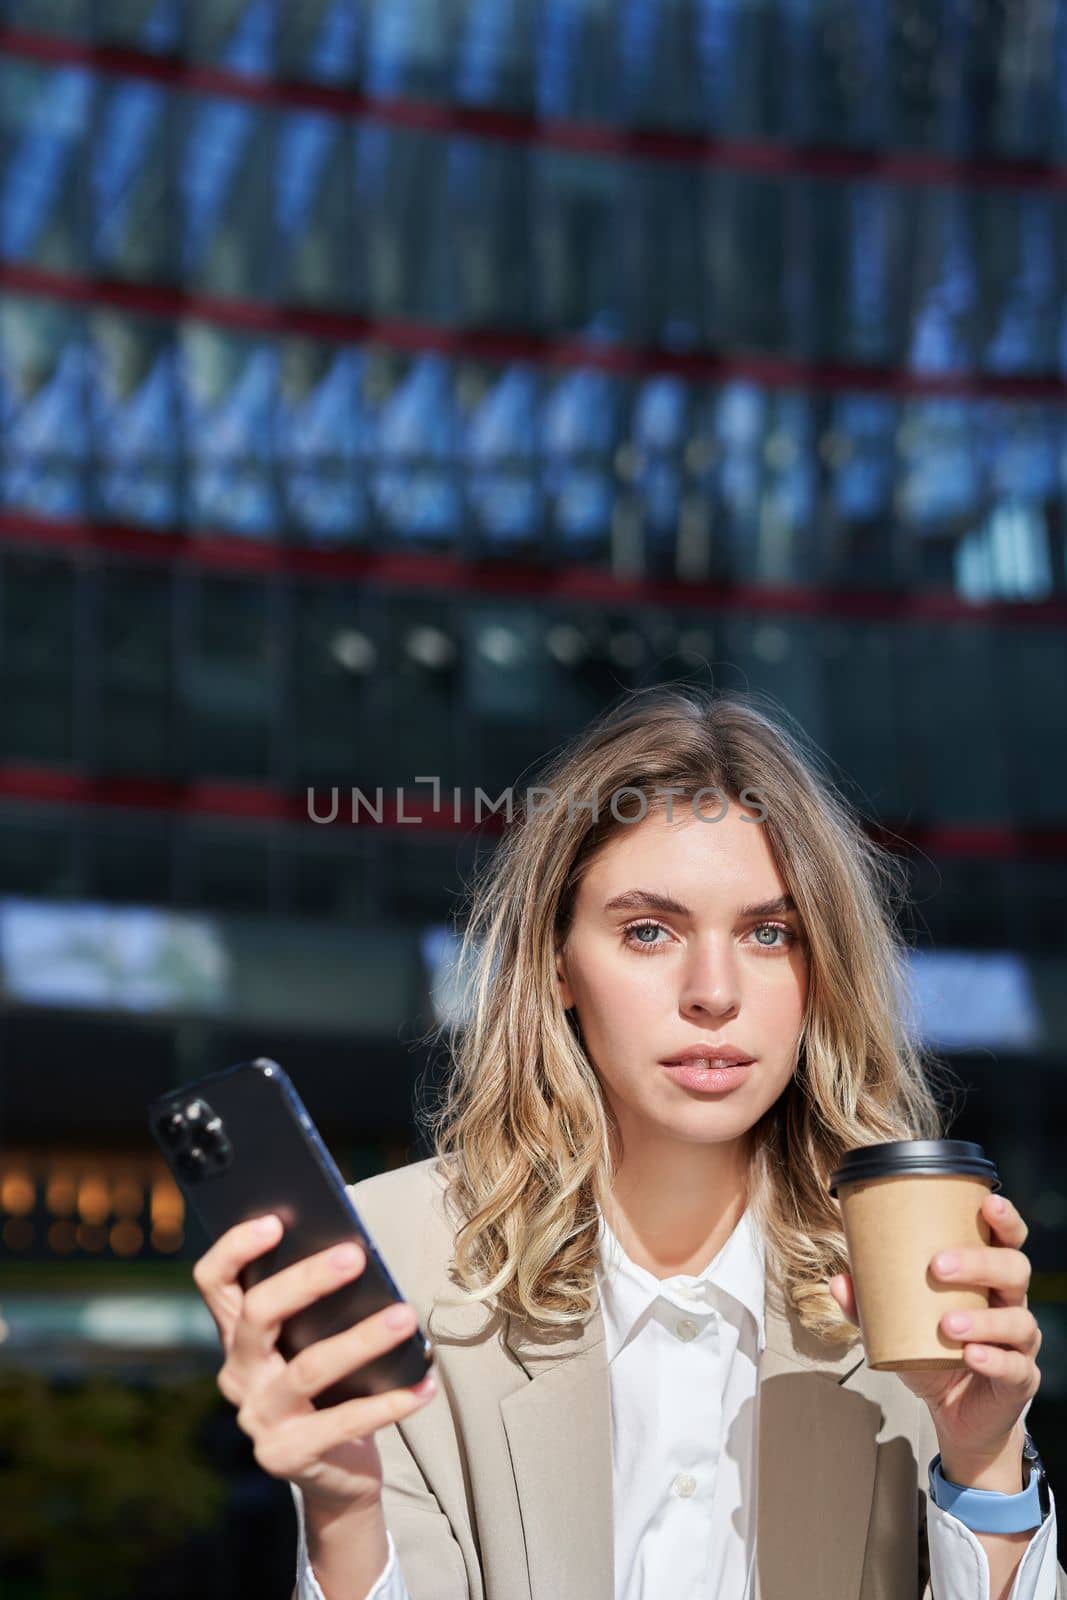 Stylish young corporate woman standing in street, drinks coffee and holds mobile phone.